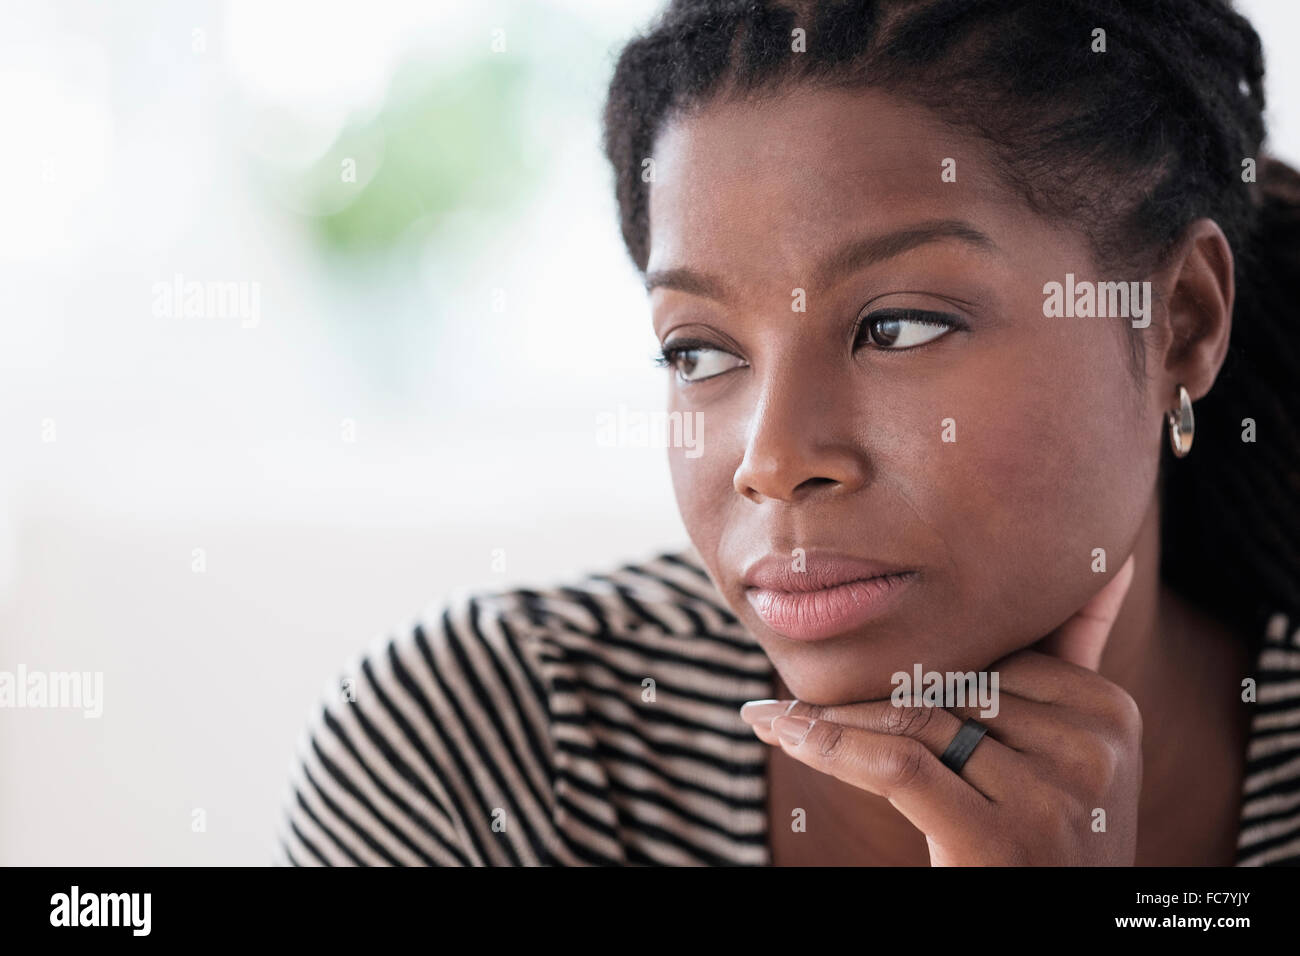 Black woman resting chin in hand Stock Photo